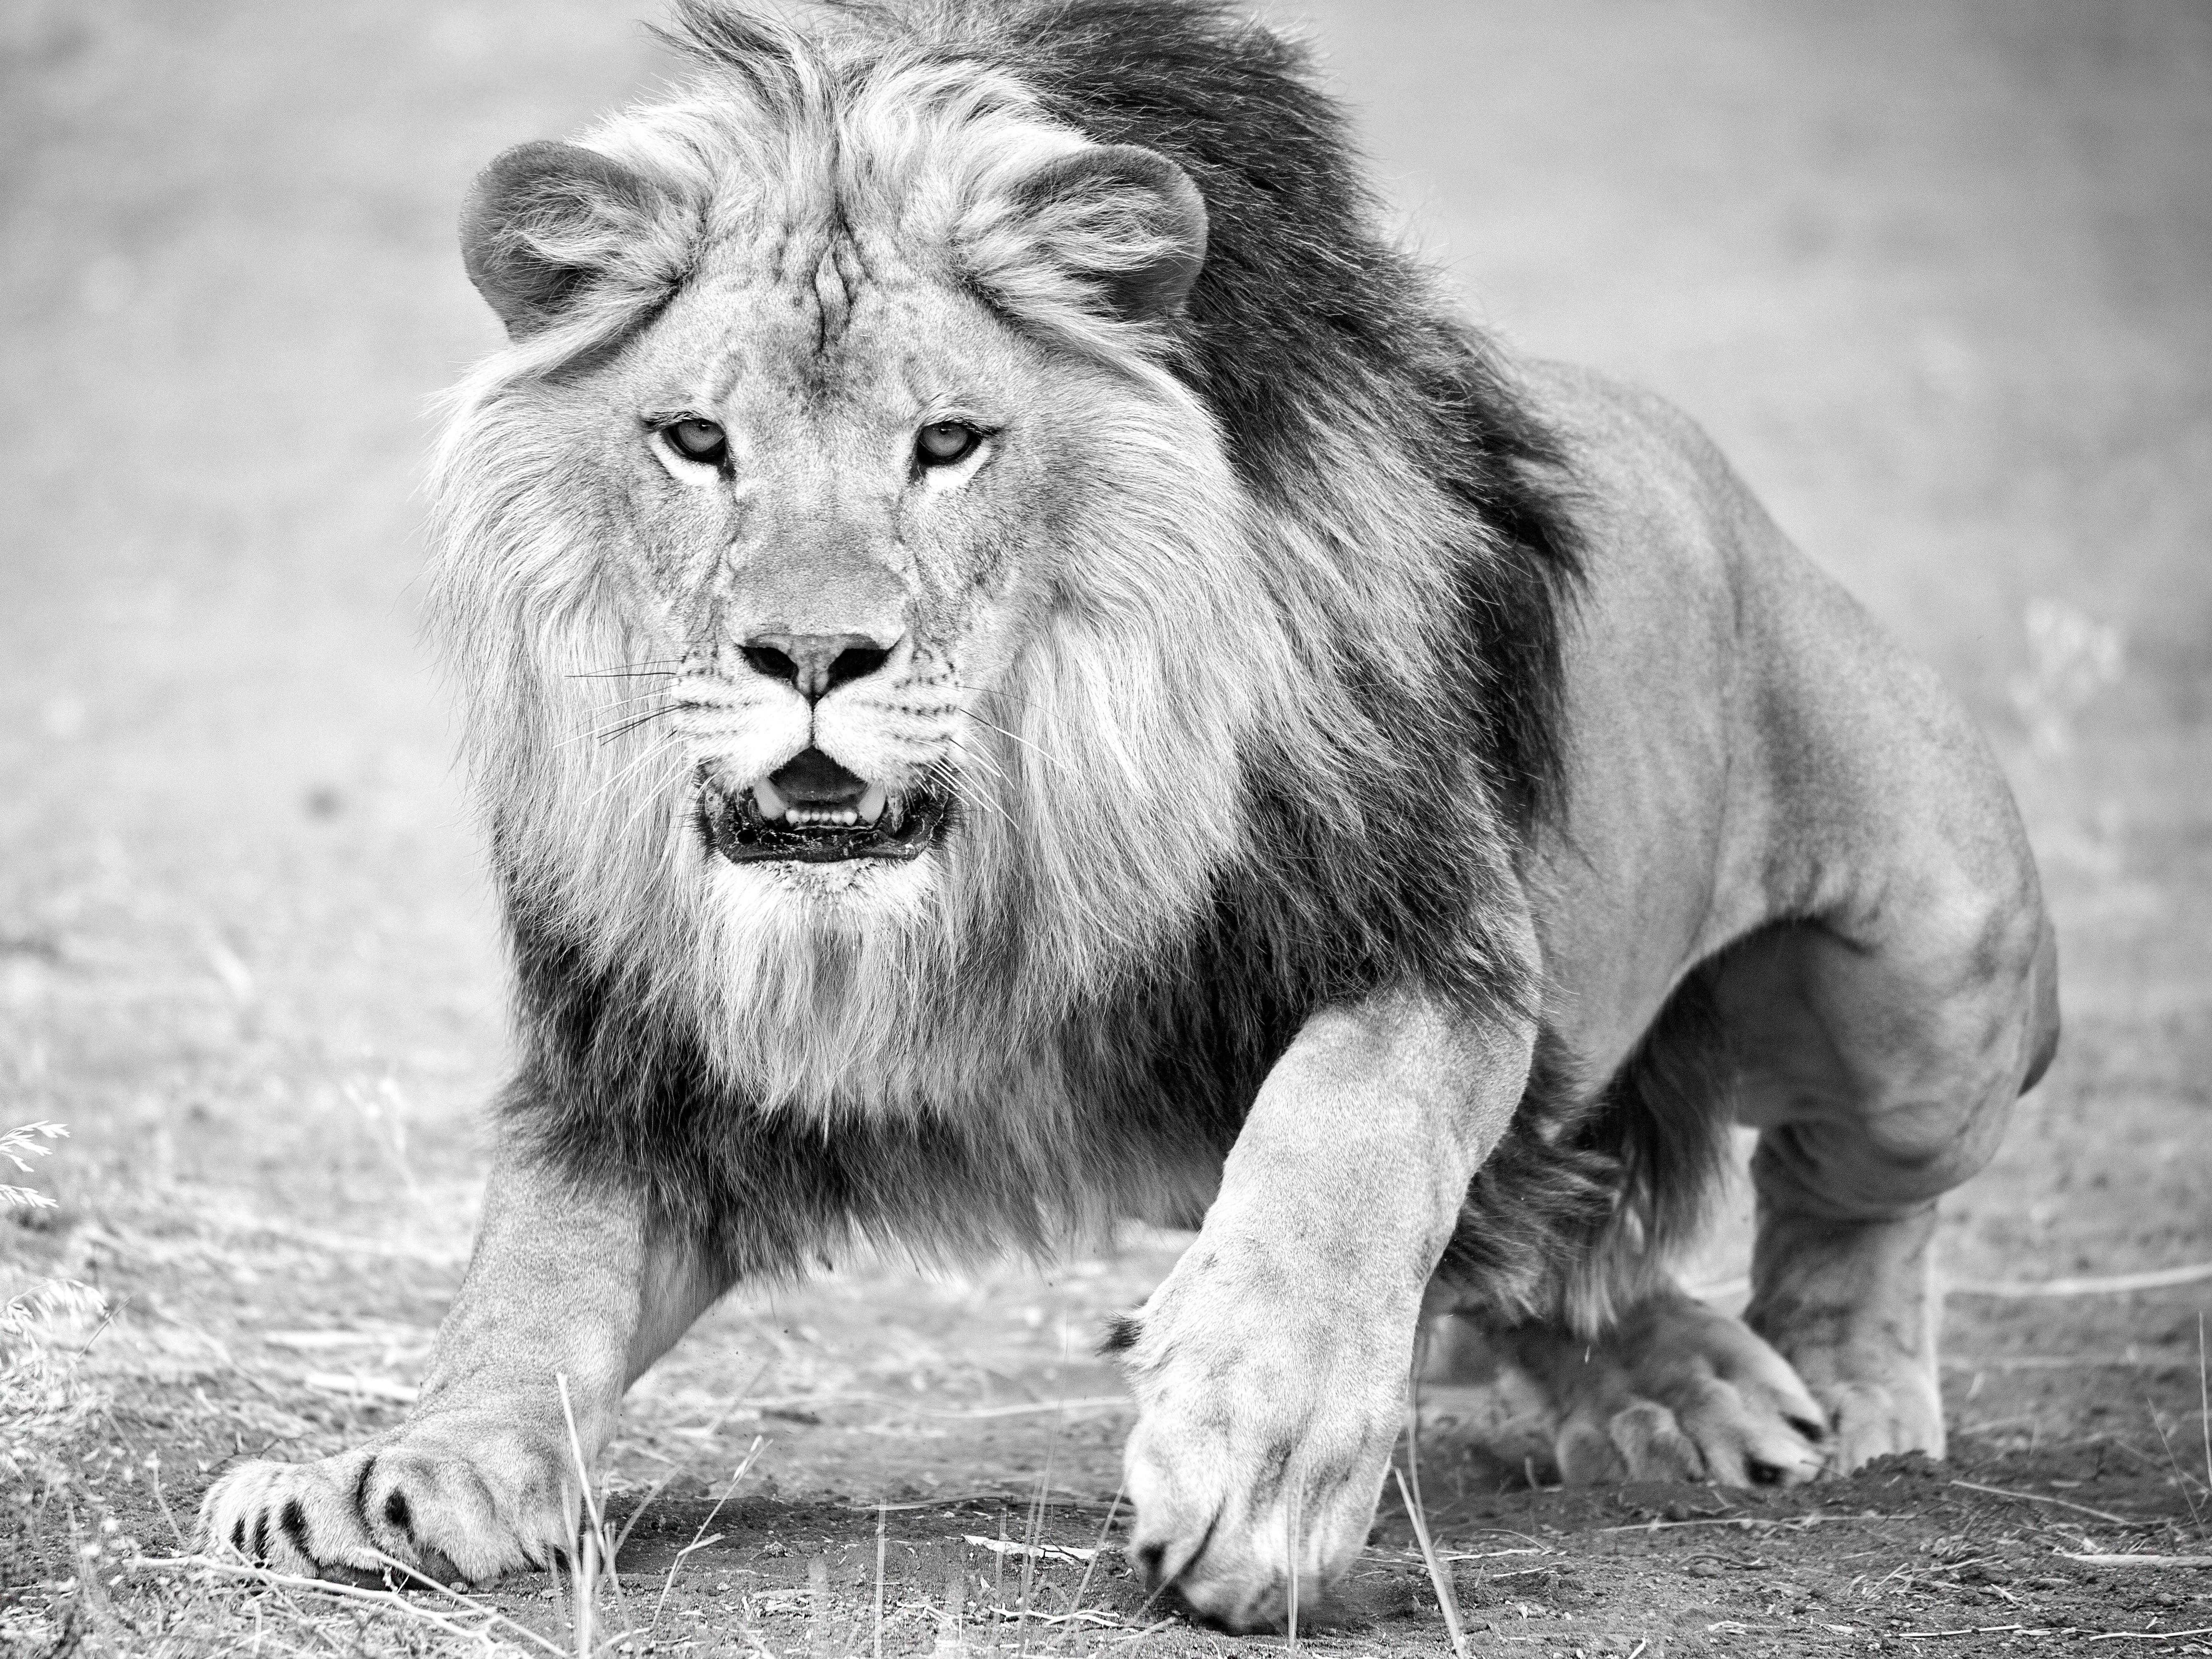 Shane Russeck Animal Print - "The Charge" 36x48 - Black & White Photography, Lion Photograph